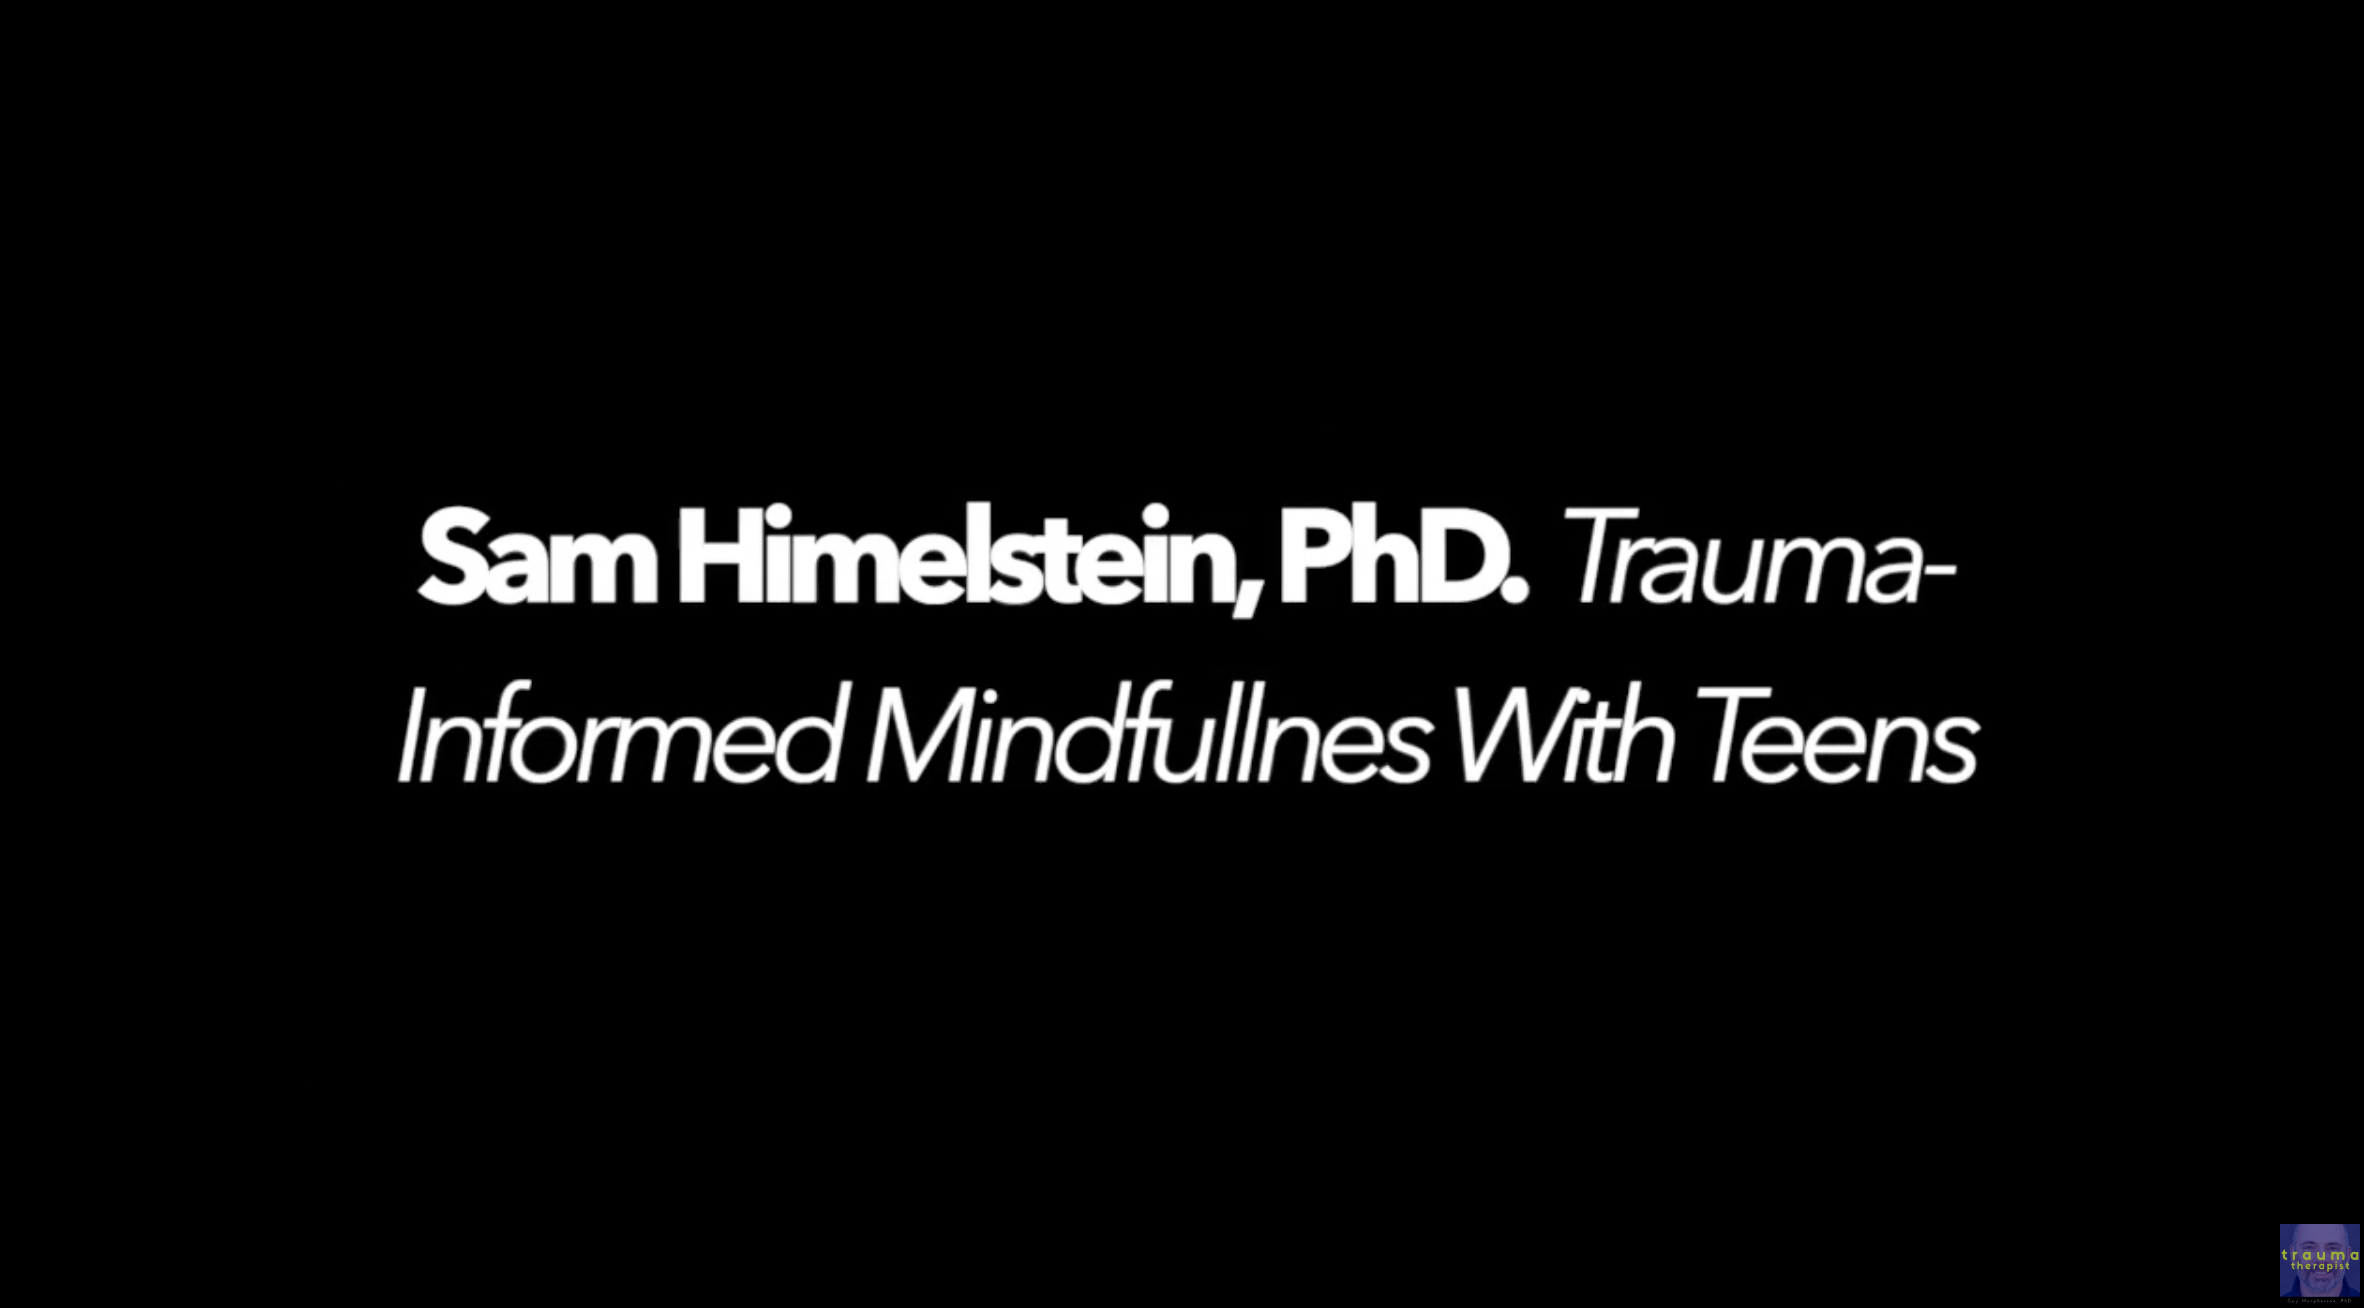 video of Sam Himelstein's podcast on his trauma informed approach to mindfulness with traumatised